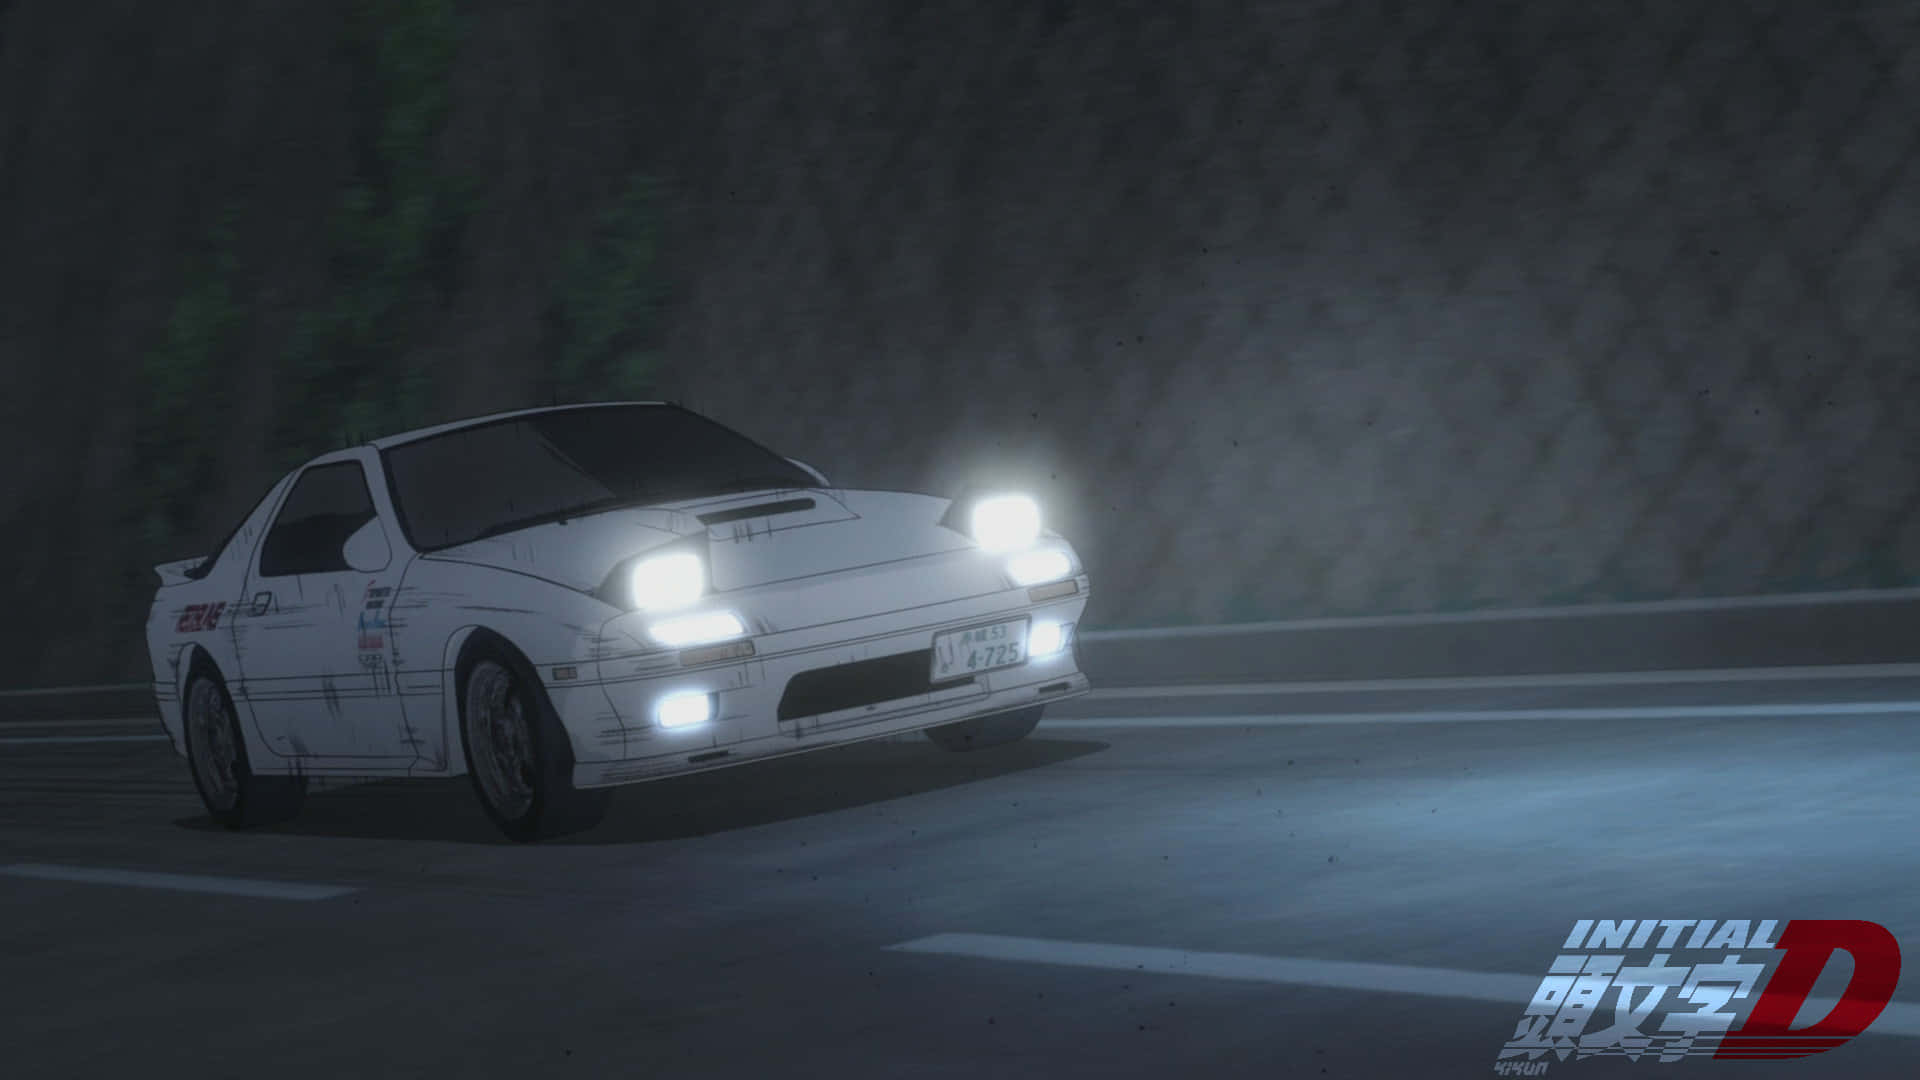 White RX-7 FC Initial D background